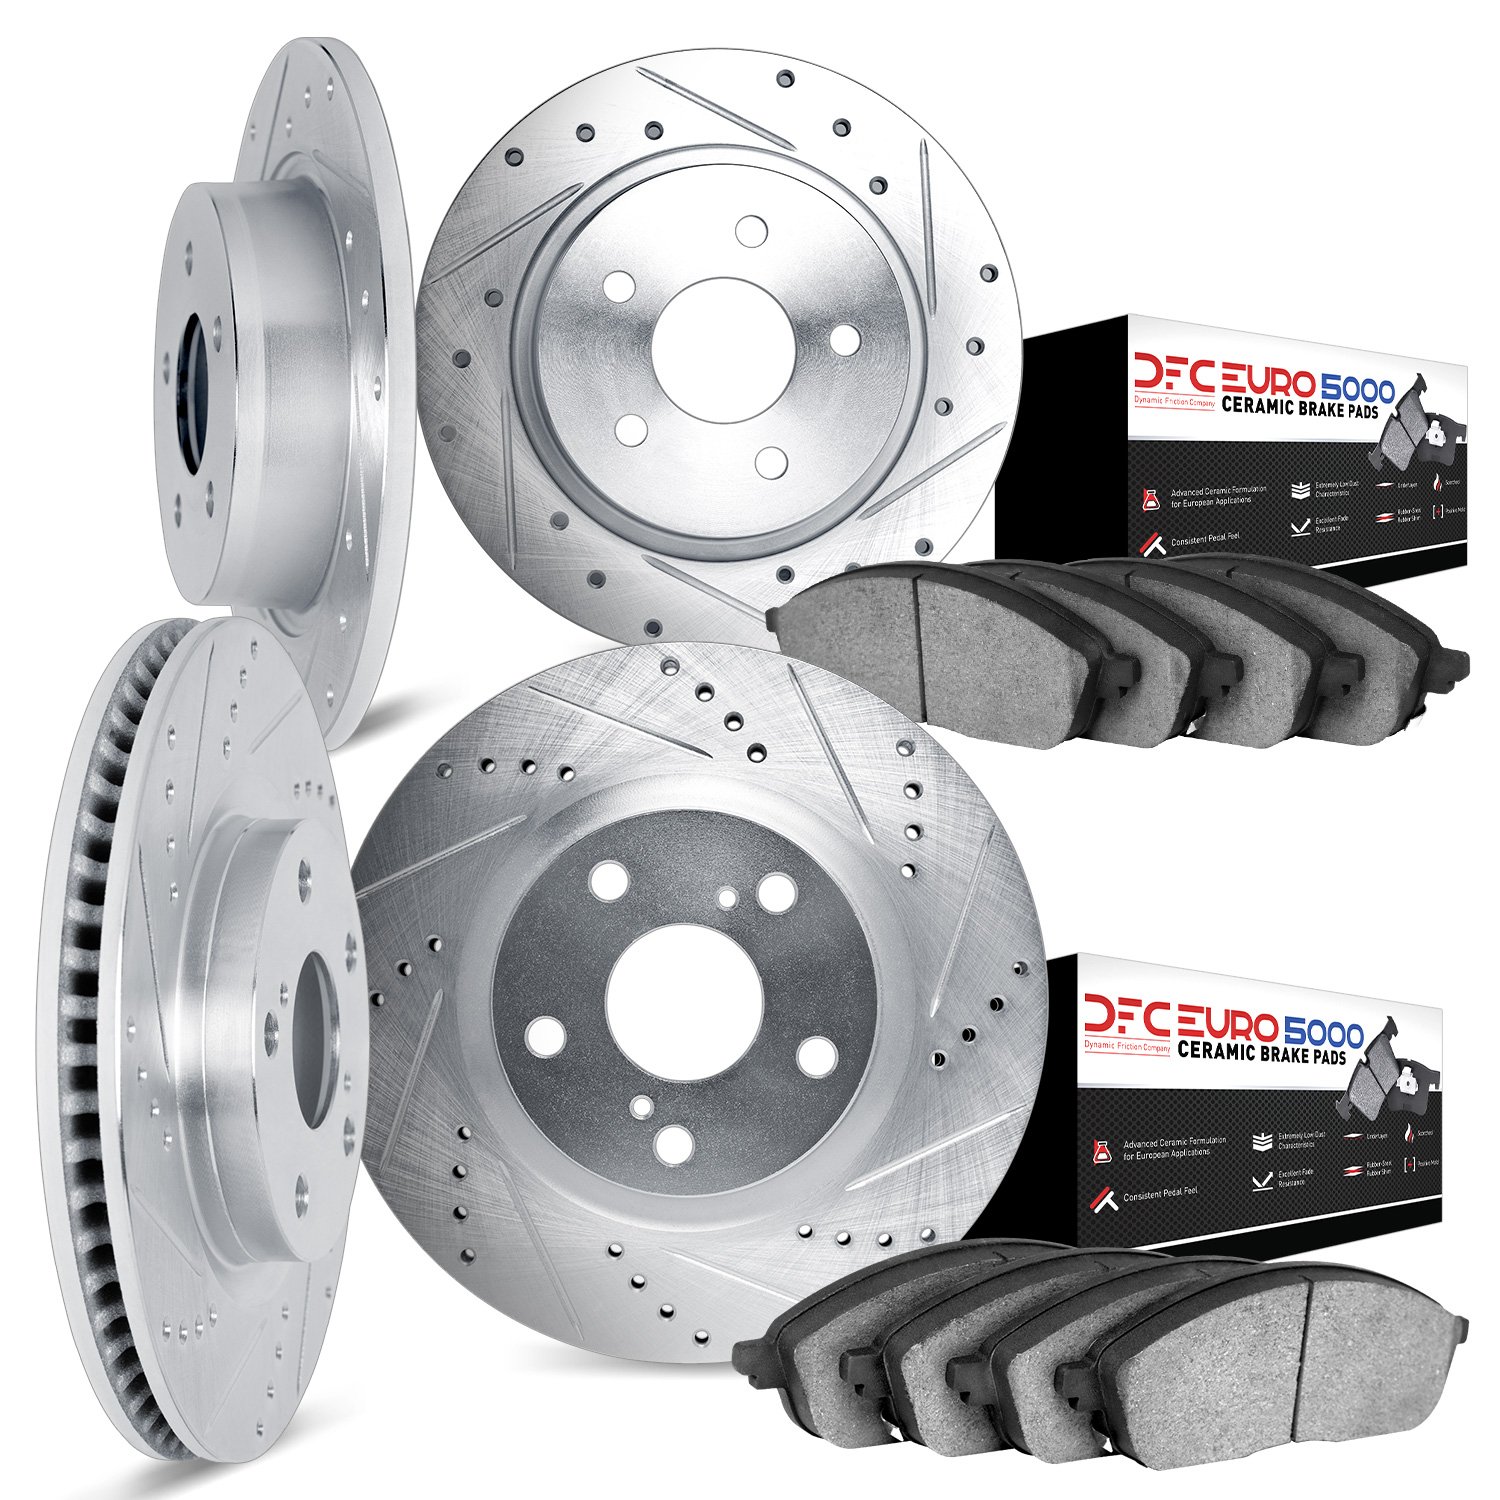 7604-31002 Drilled/Slotted Brake Rotors w/5000 Euro Ceramic Brake Pads Kit [Silver], 1982-1989 BMW, Position: Front and Rear